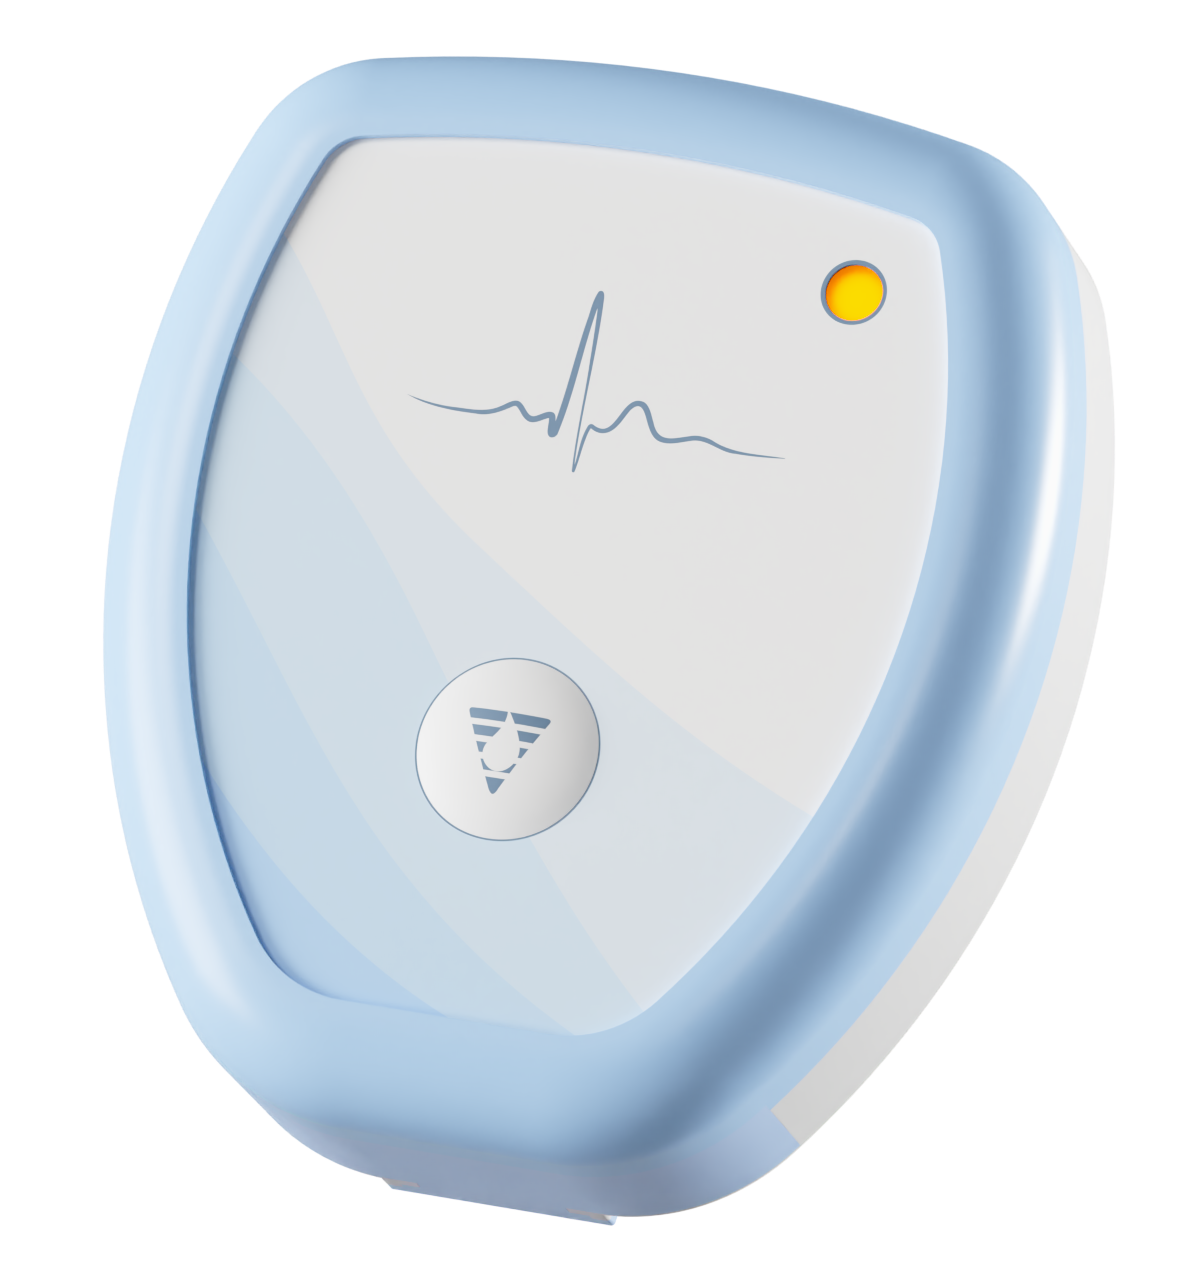 Hearty Patch cardiac monitor device for ECG monitoring